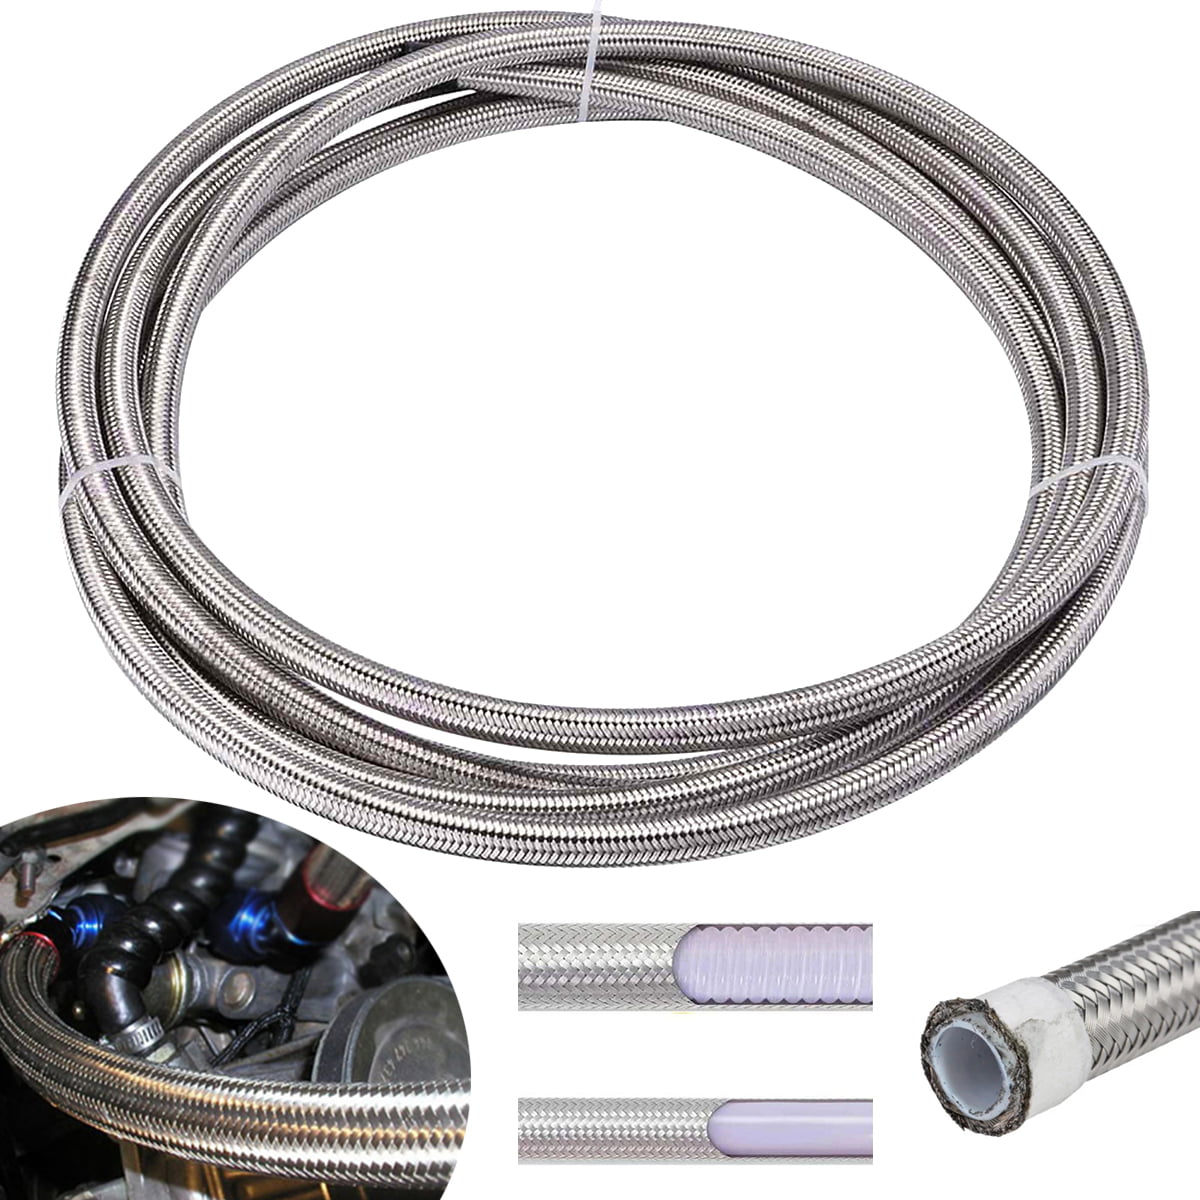 STAINLESS STEEL BRAIDED HOSE WITH END CLIPS 8MM 5/16" 